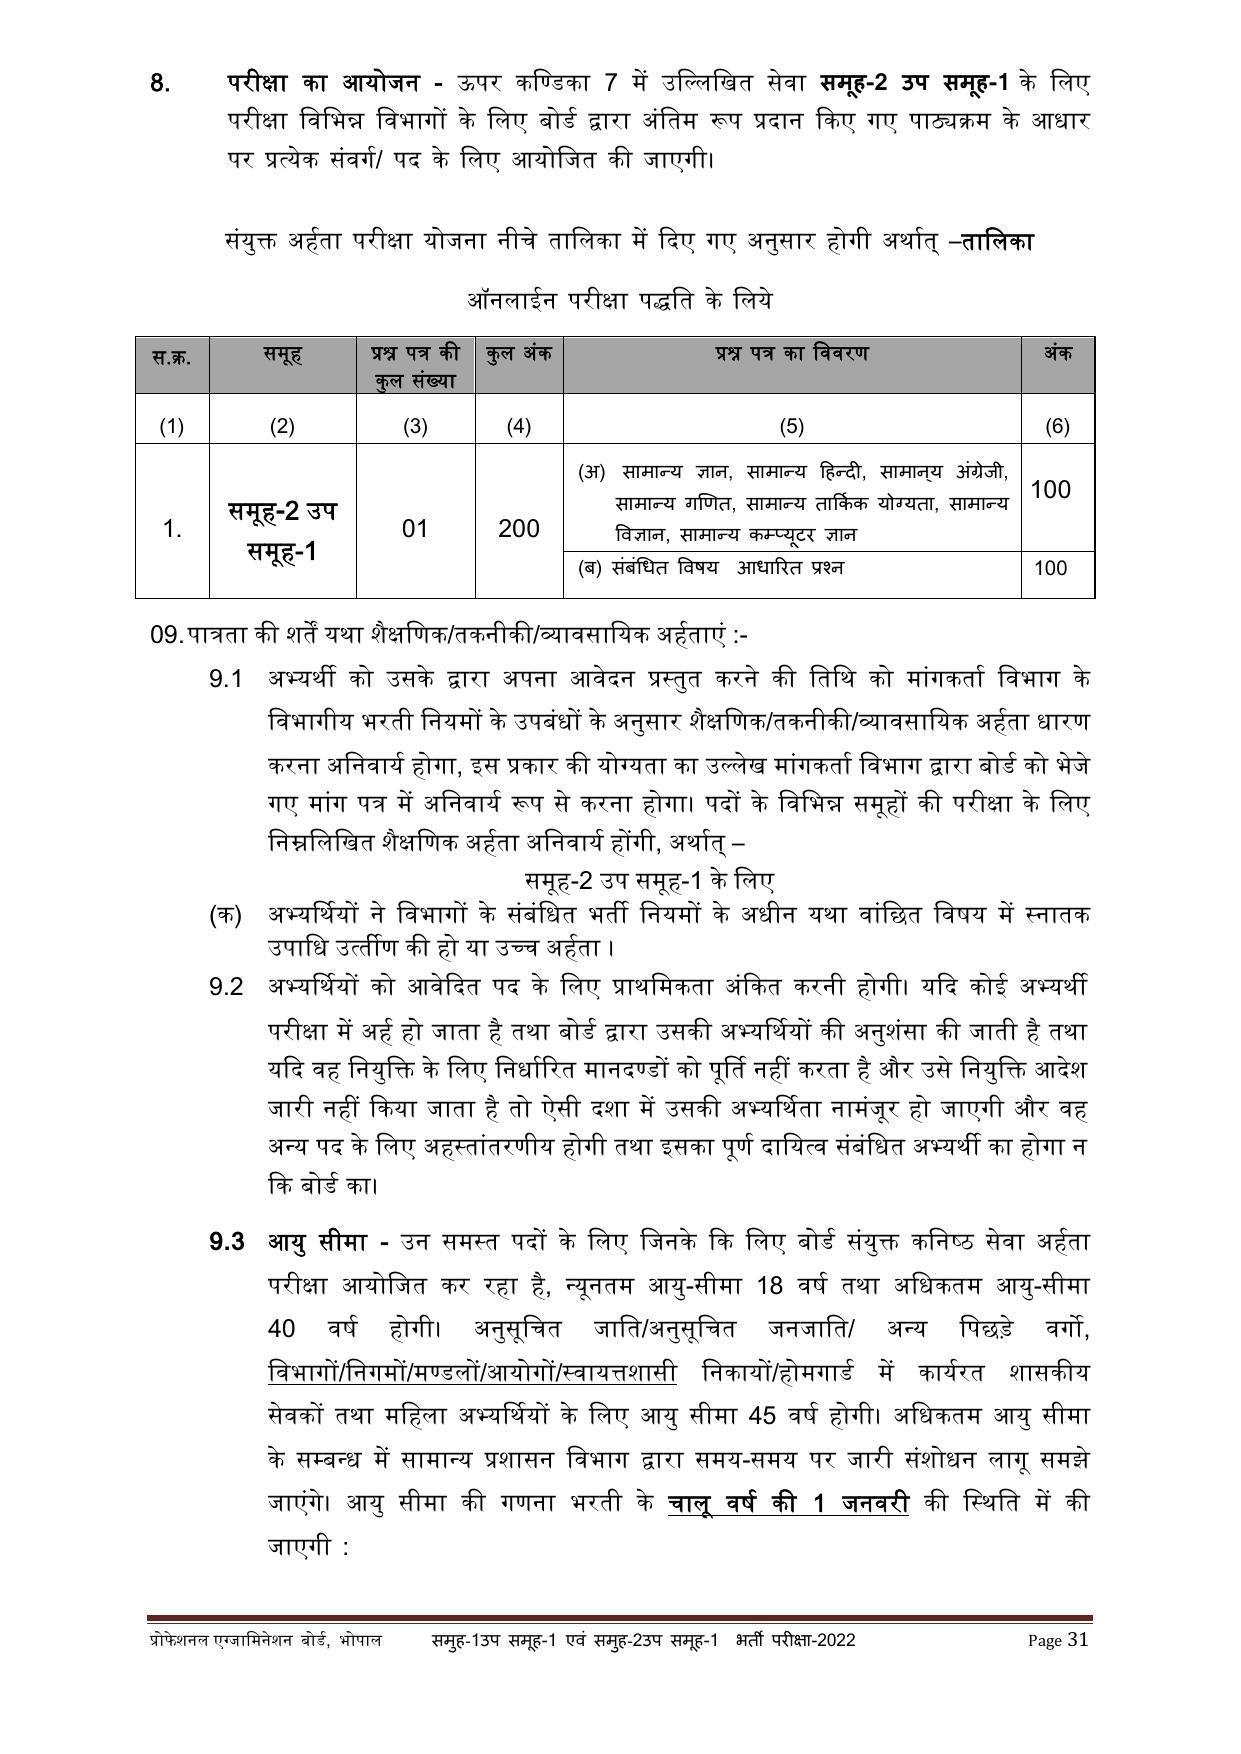 MPPEB Group-I Sub Group-I & Group-II Sub Group-I Recruitment 2022 - Page 46